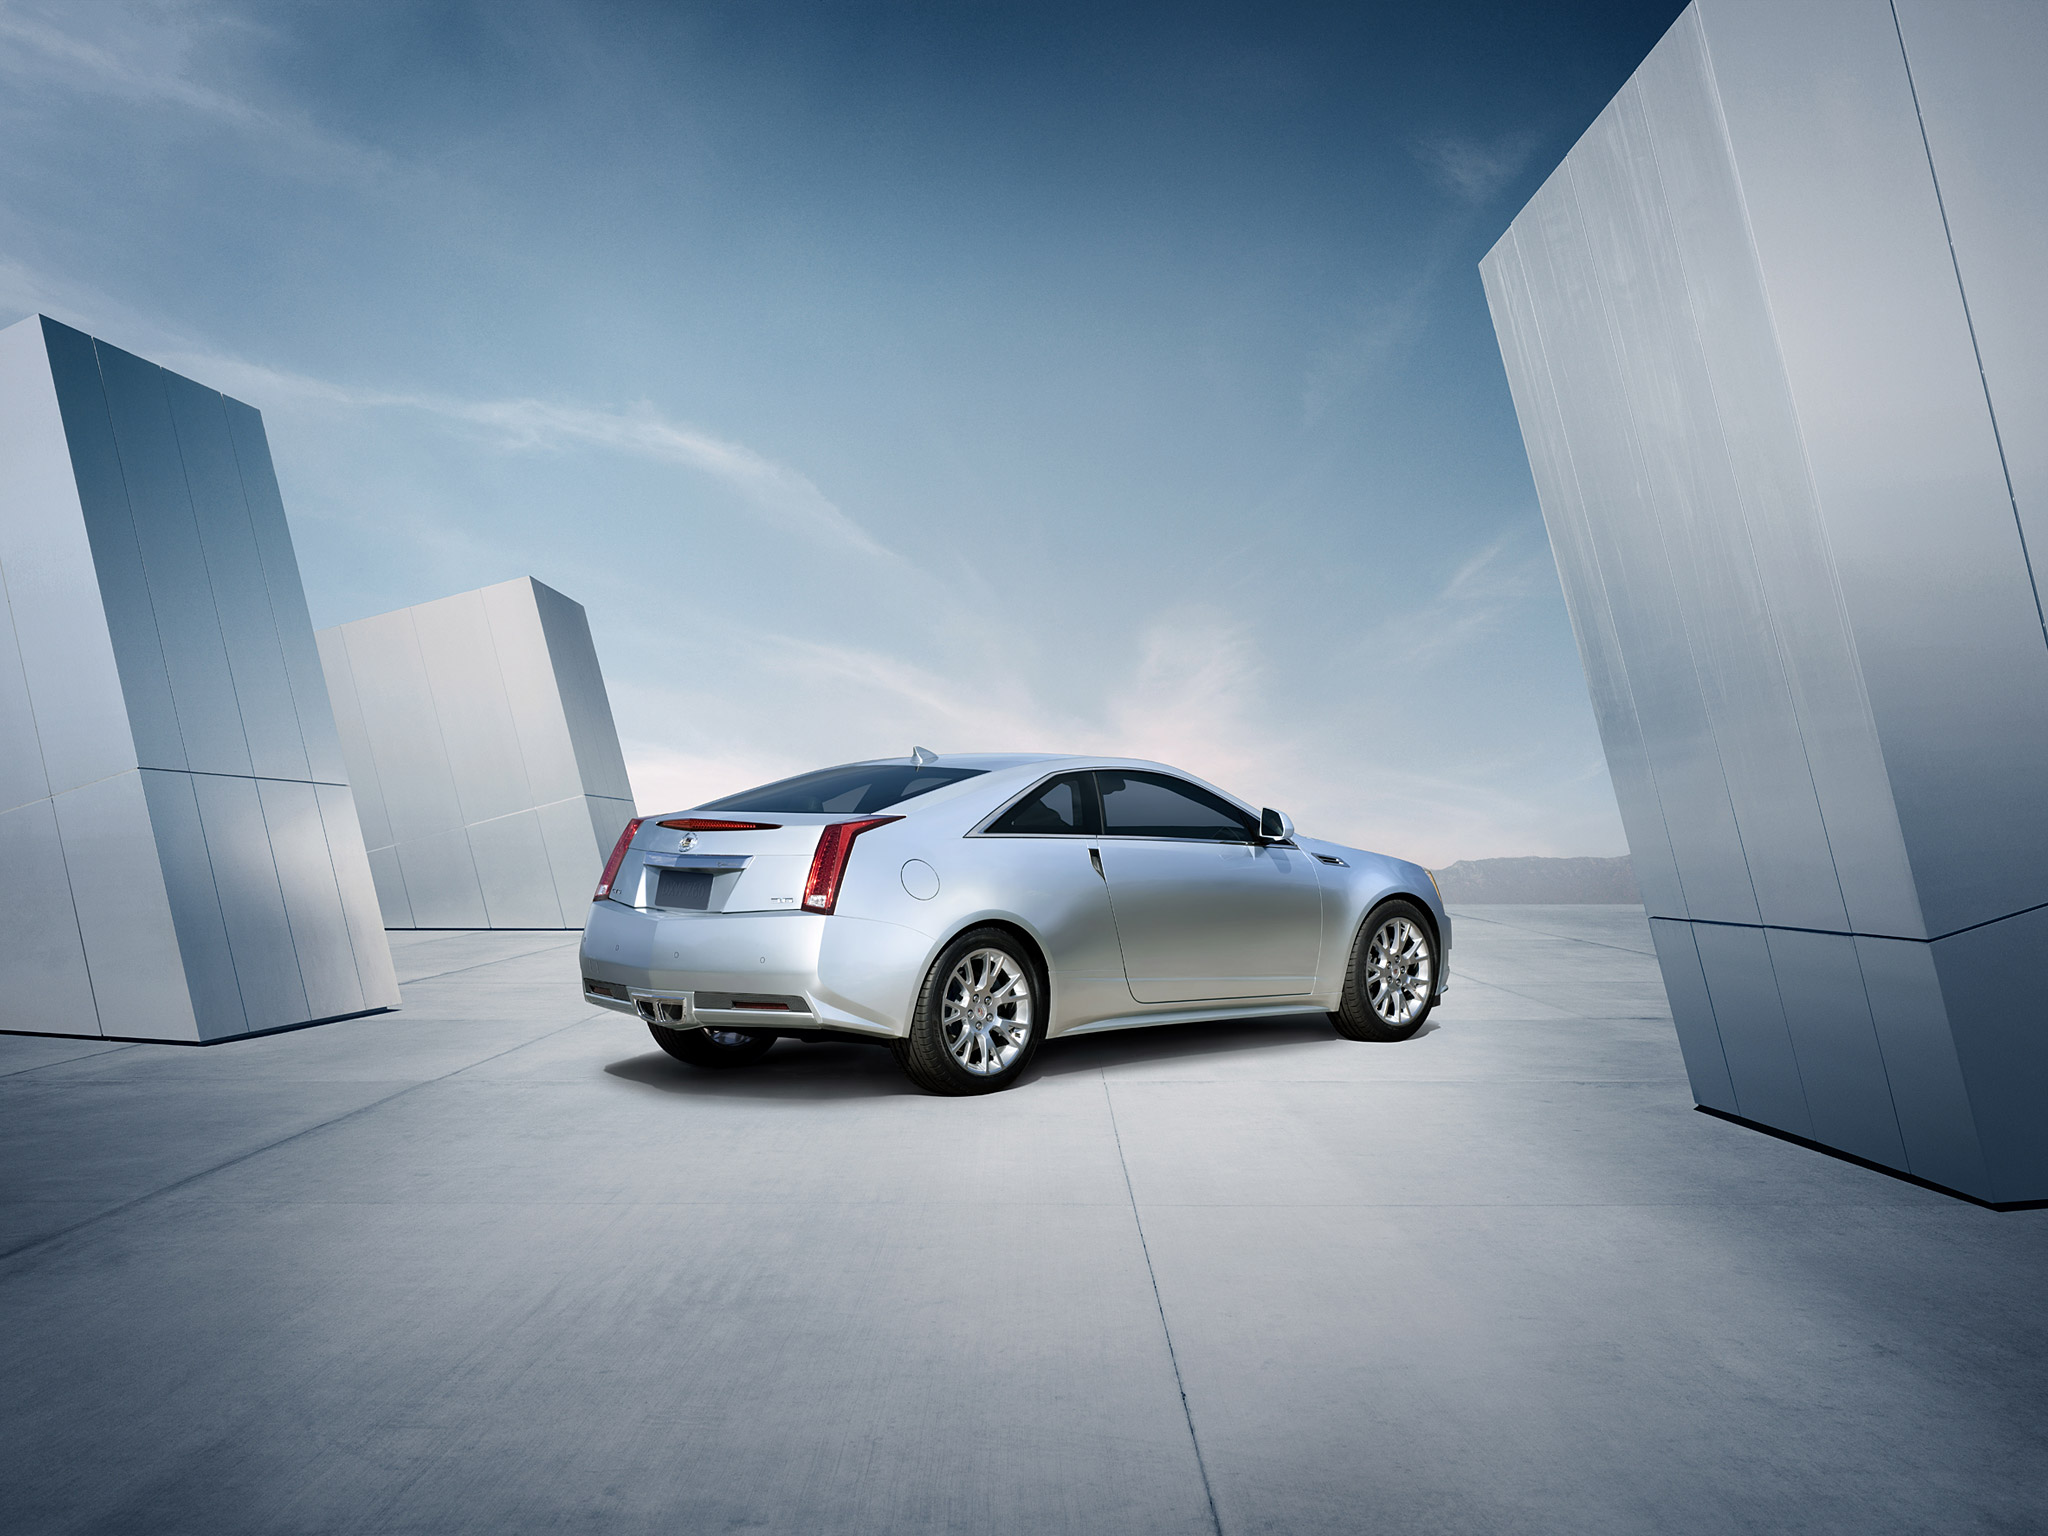  2011 Cadillac CTS Coupe Wallpaper.